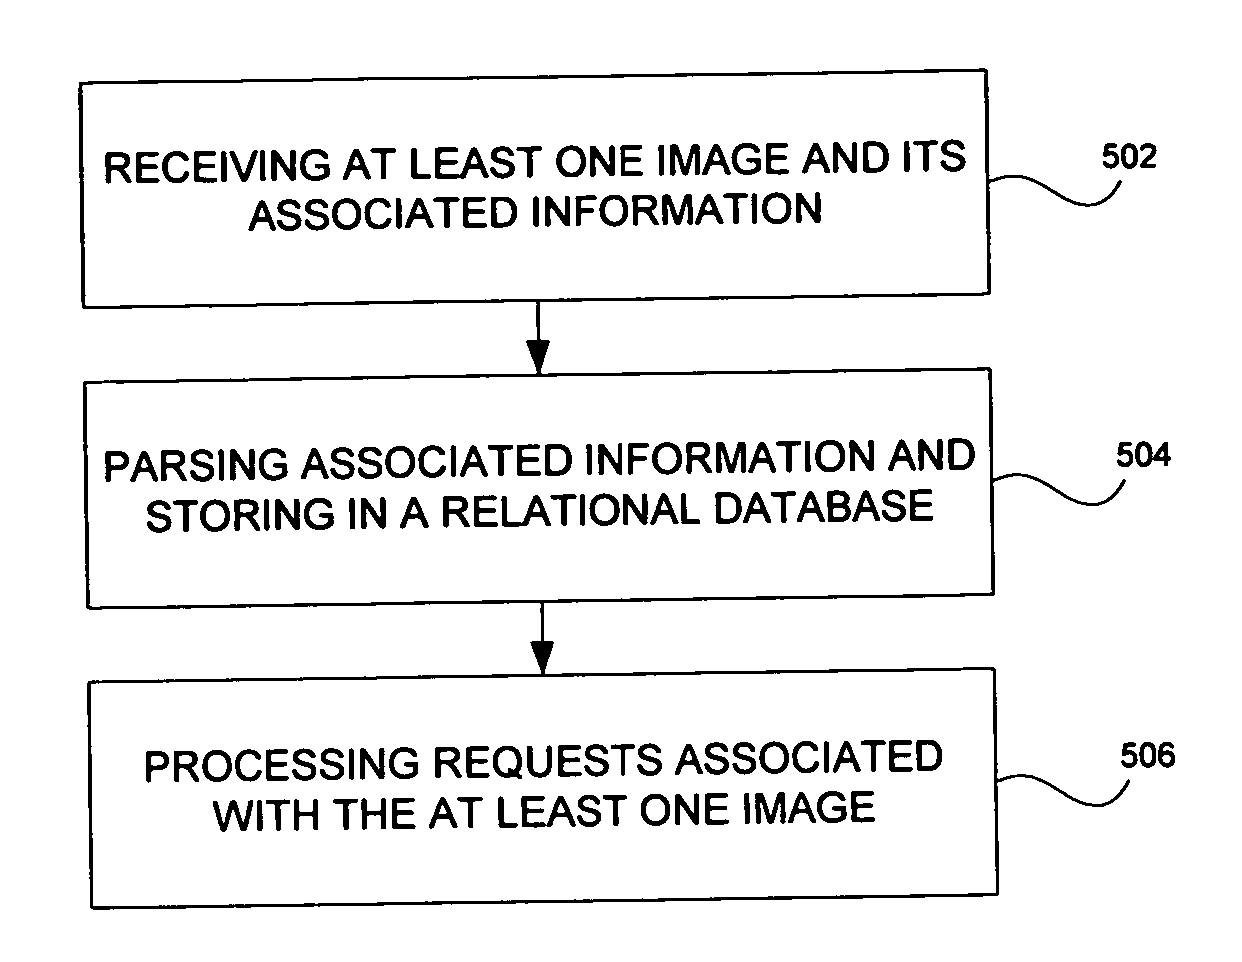 System and method for embedding and retrieving information in digital images and using the information to copyright the digital images